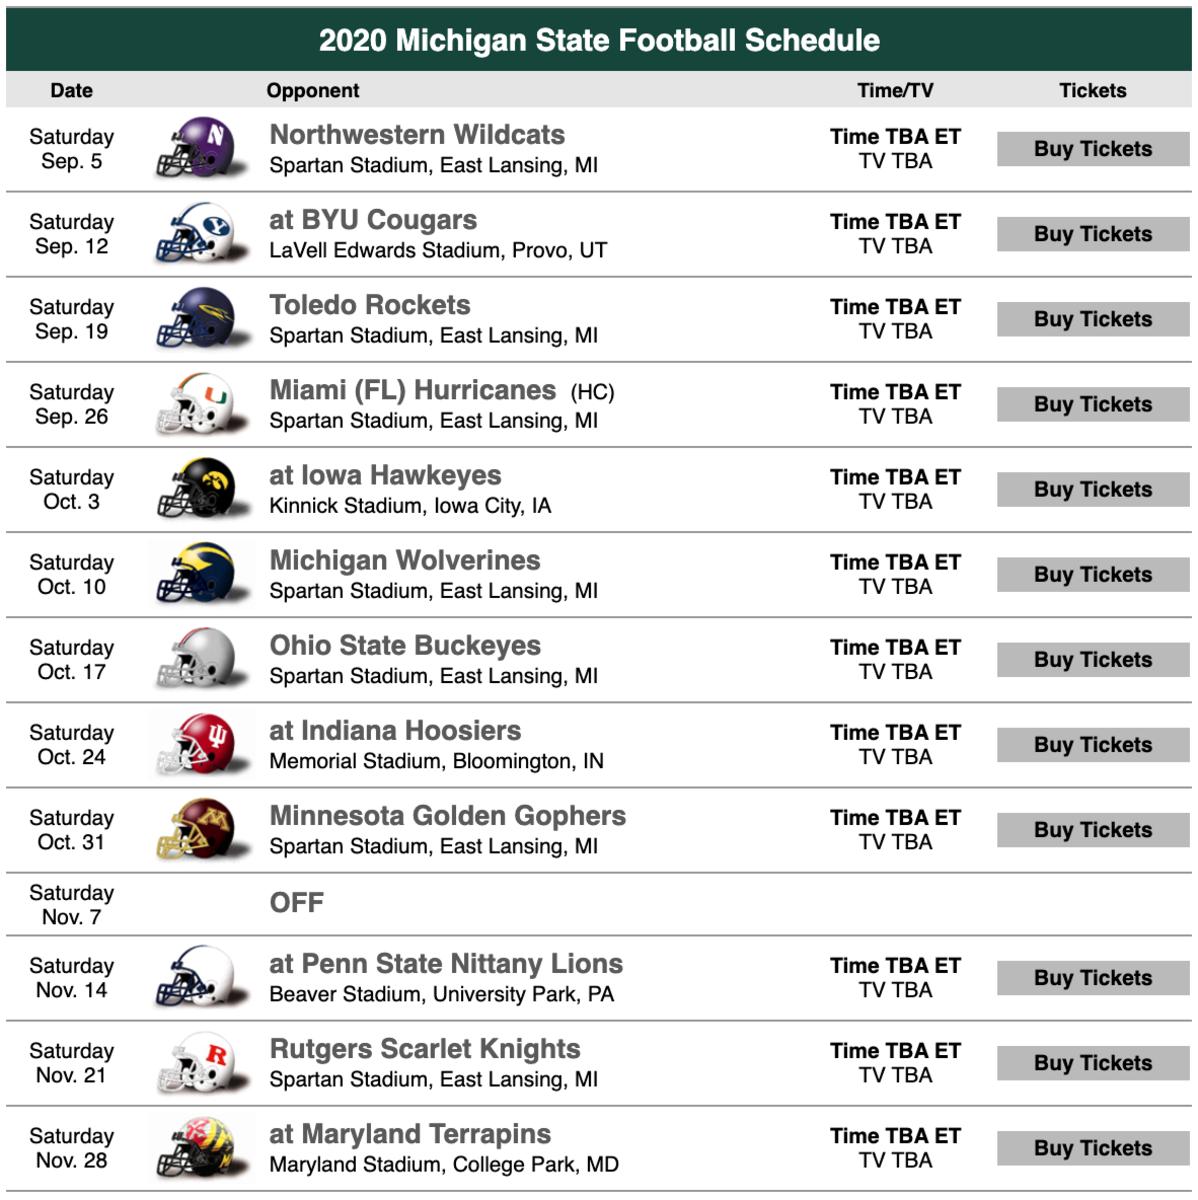 Know Thy Enemy: Updates On Michigan State, Ohio State And Penn State